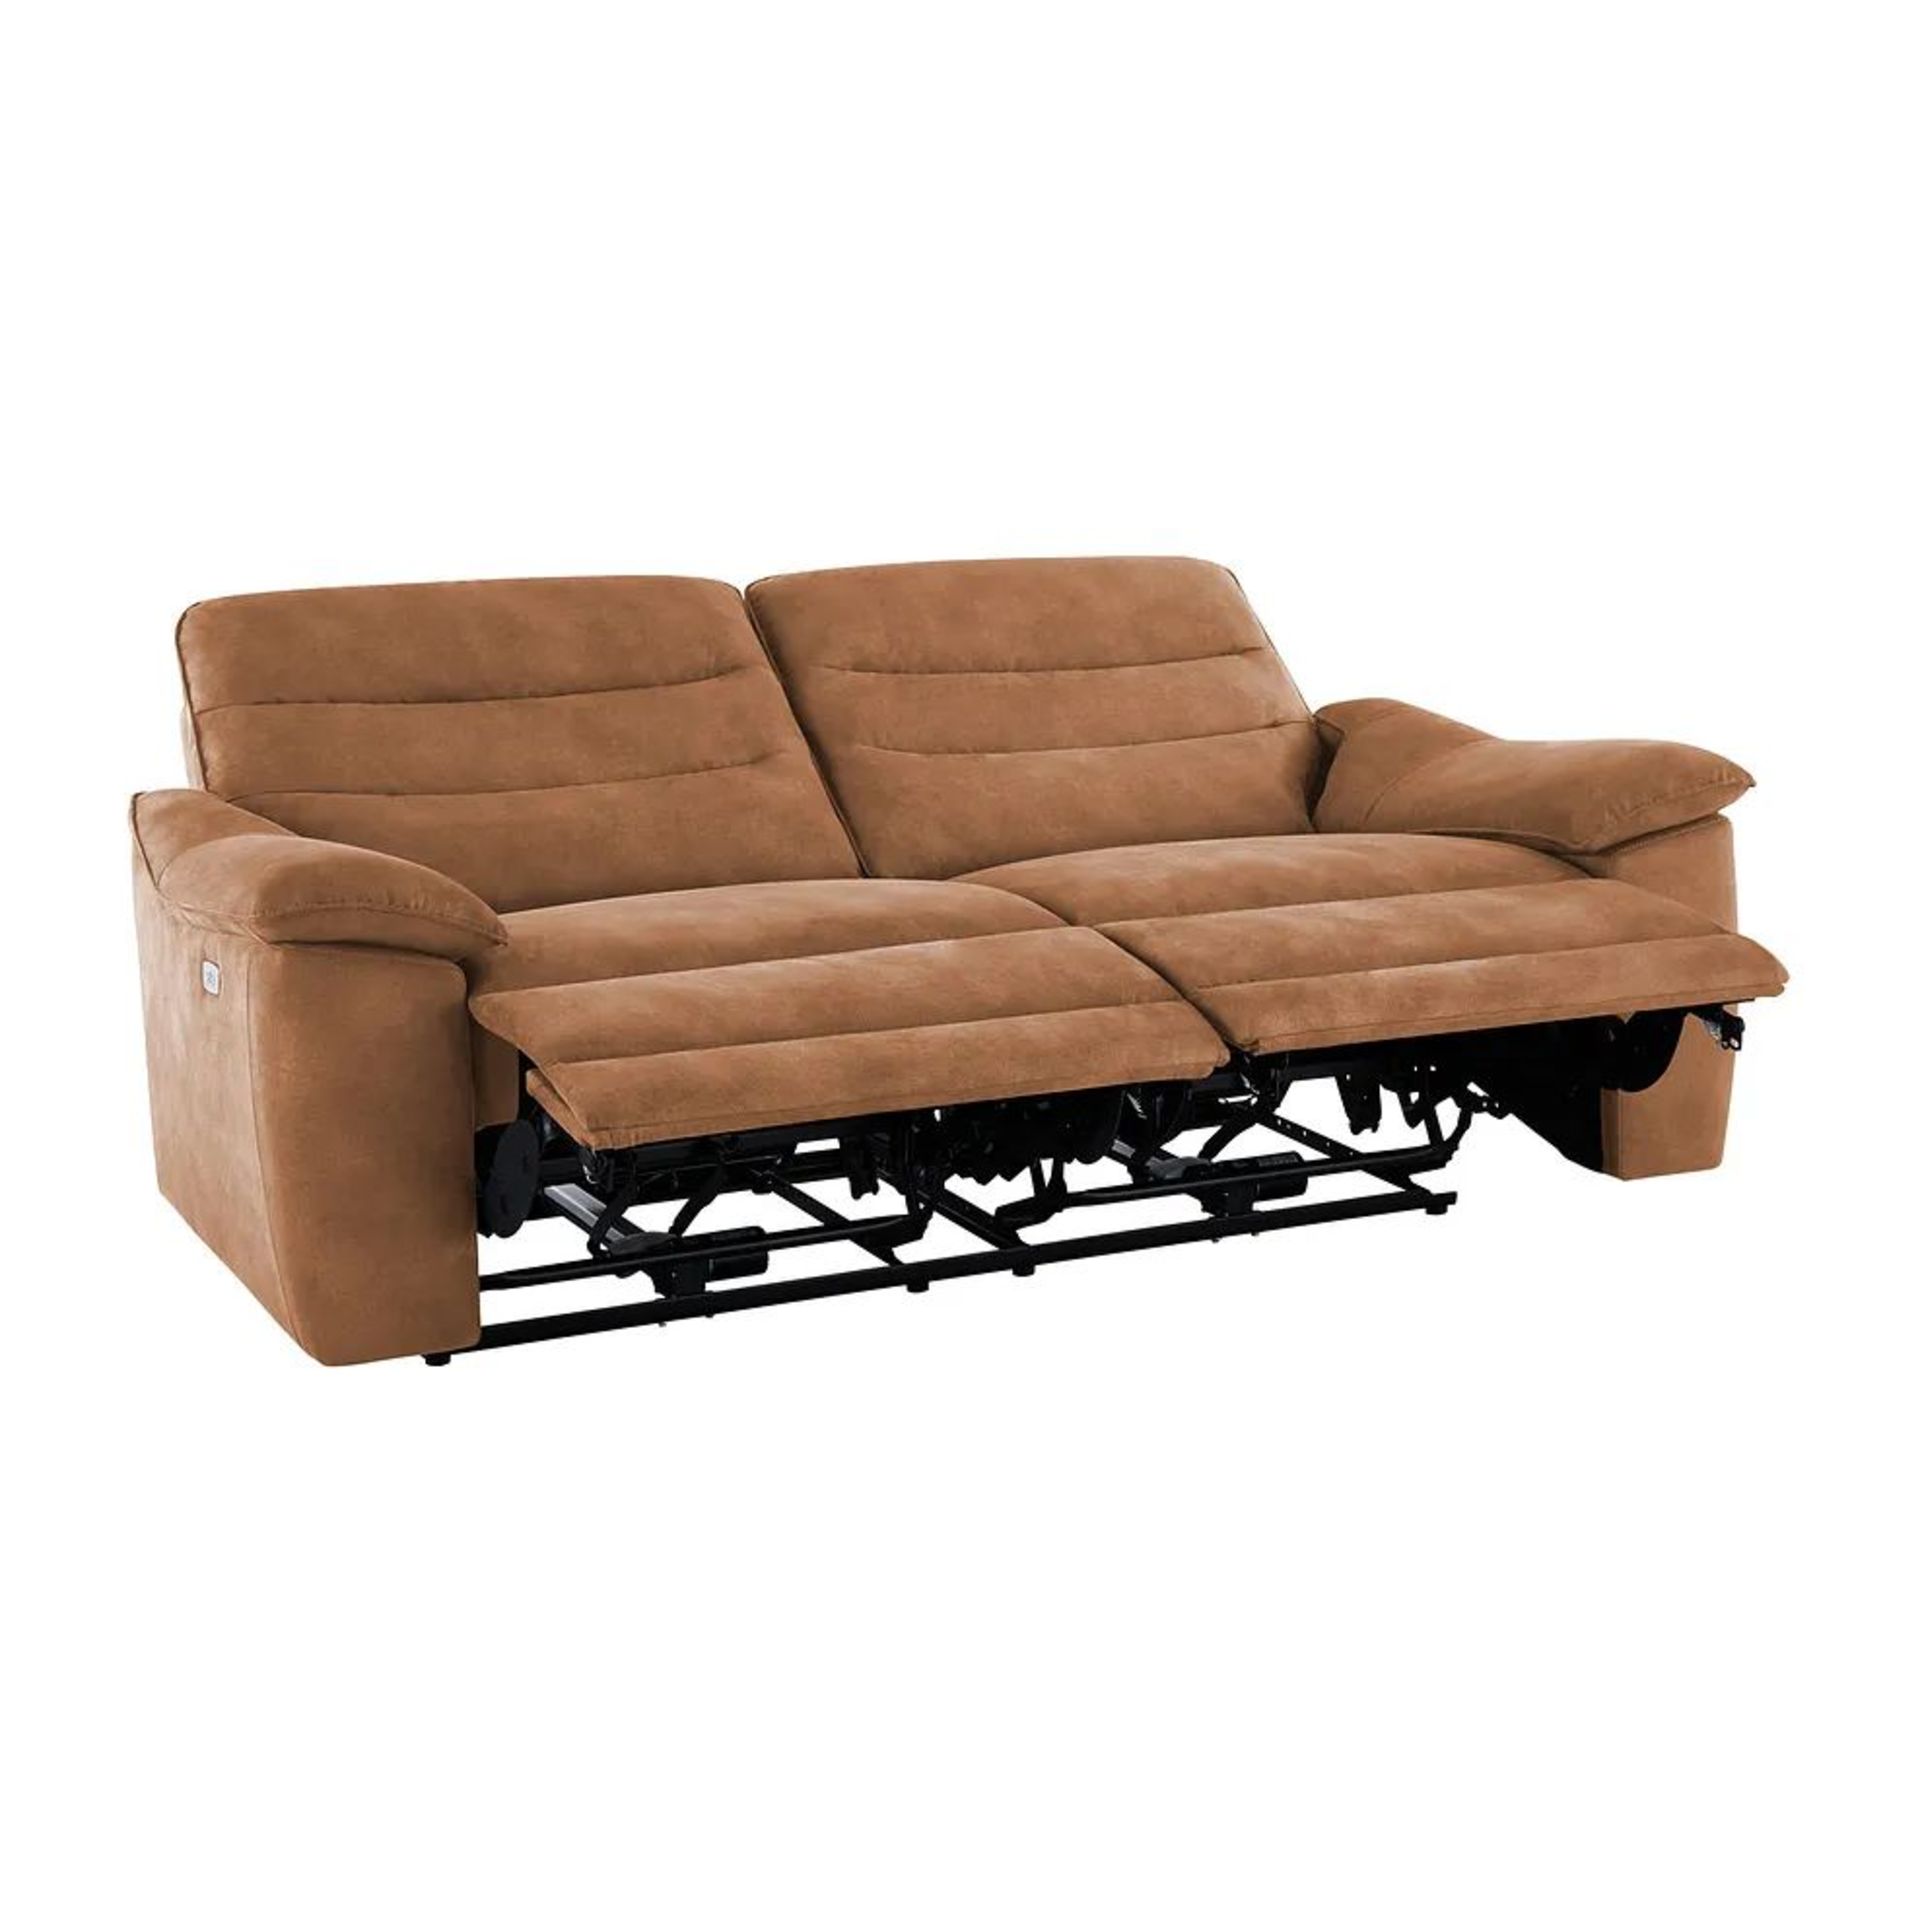 BRAND NEW CARTER 3 Seater Electric Recliner Sofa - BROWN FABRIC. RRP £1299. Shown here in Ranch - Image 5 of 12